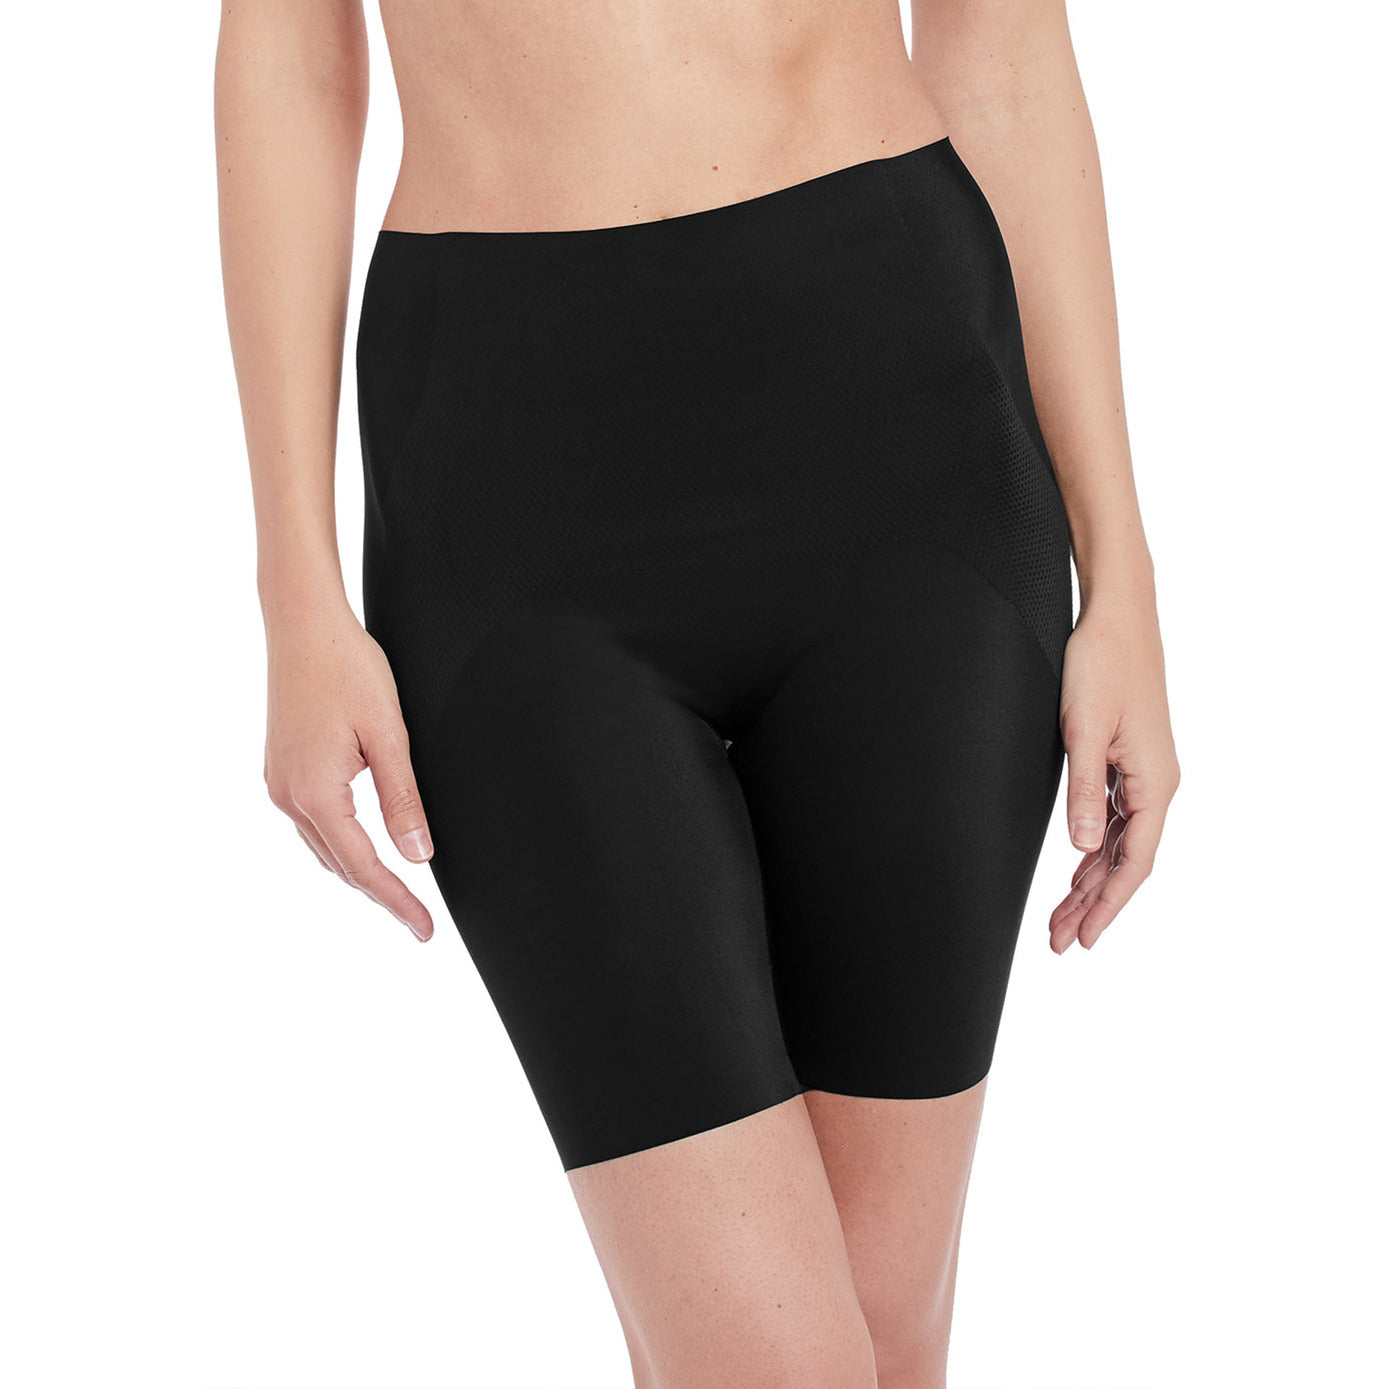 Wacoal Beyond Naked Thigh Slimmer